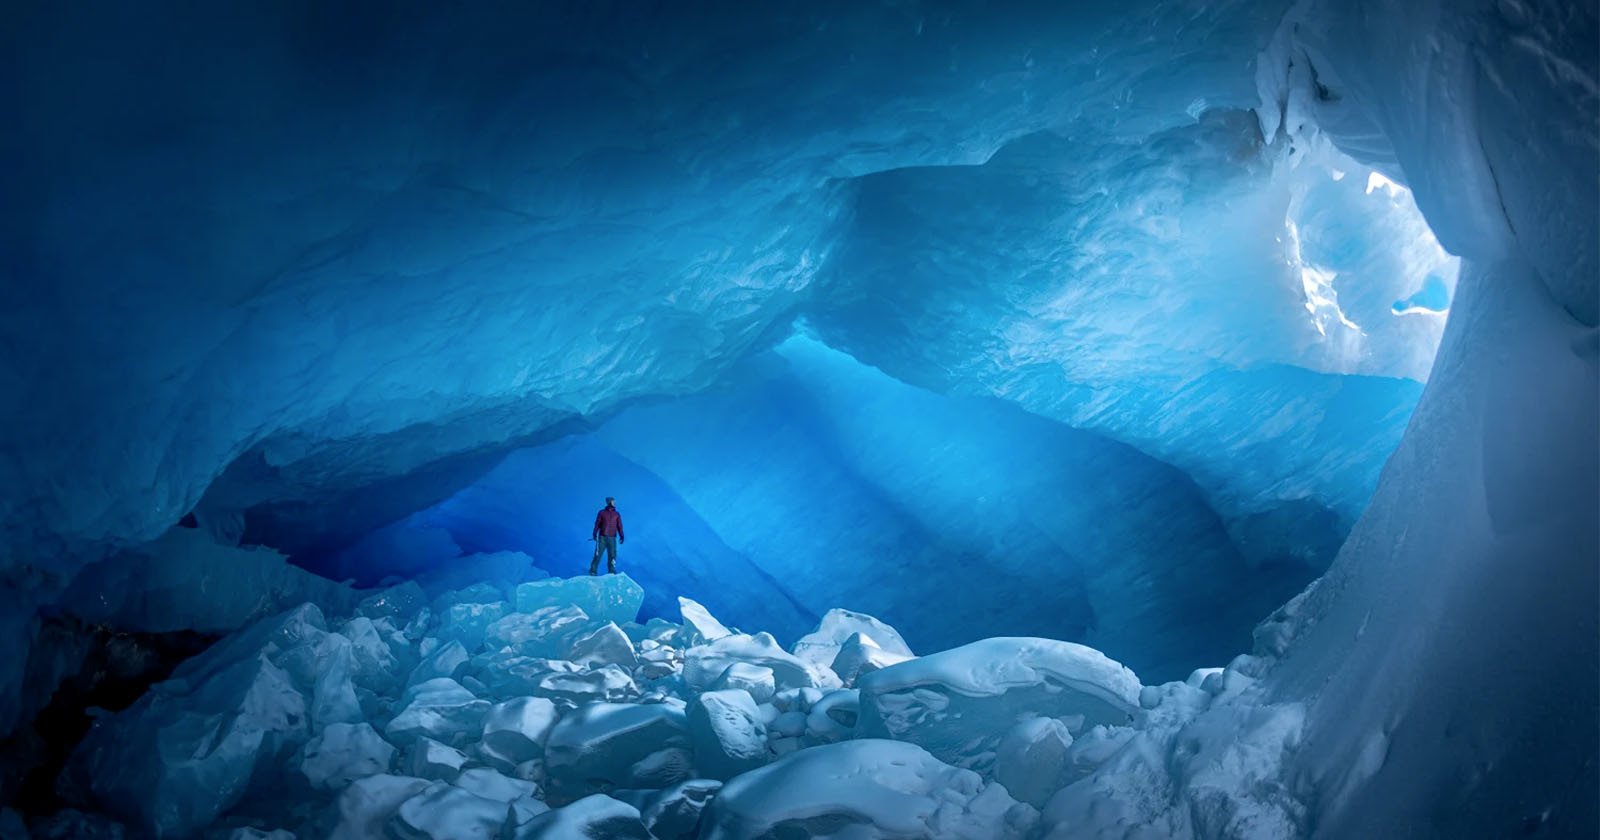 Photos of Majestic Ice Caves Hidden in the Canadian Rockies